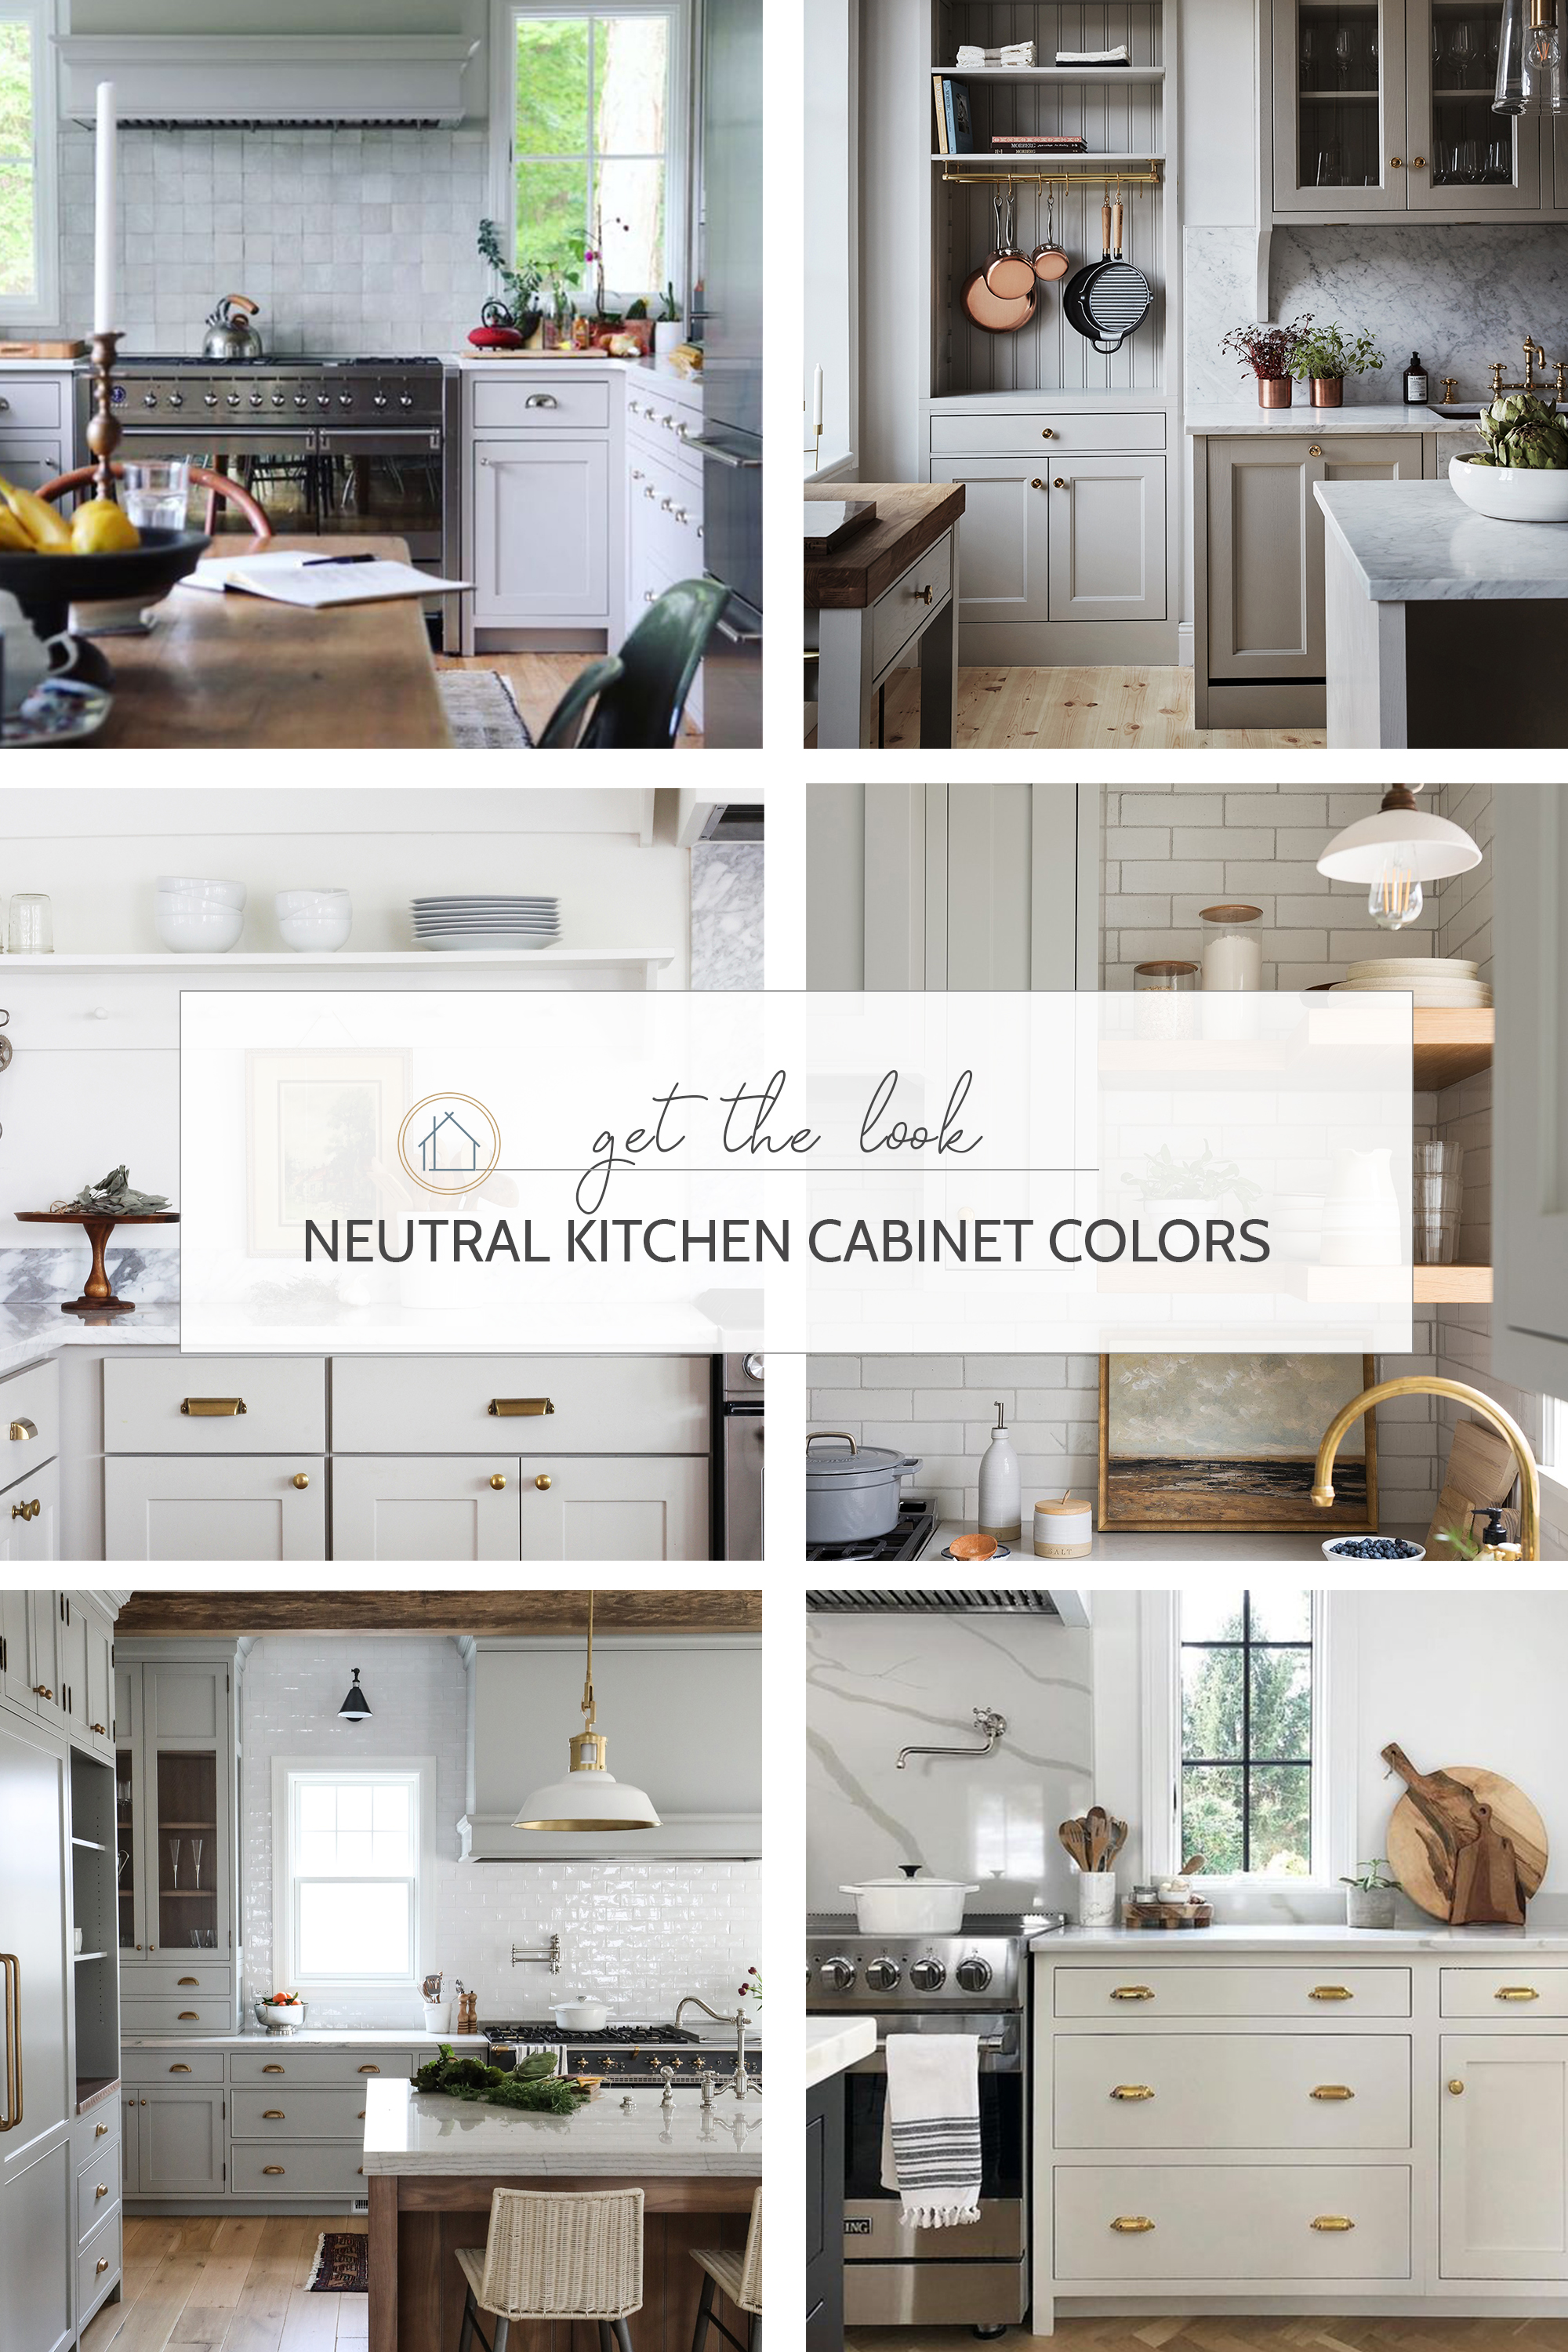 https://images.squarespace-cdn.com/content/v1/5be9bbd22971147cb7a5b687/1549684625757-SK7DZTN23ZAFF53XKVQT/neutral+cabinet+paint+colors+for+kitchens+%2F%2F+the+Grit+and+Polish